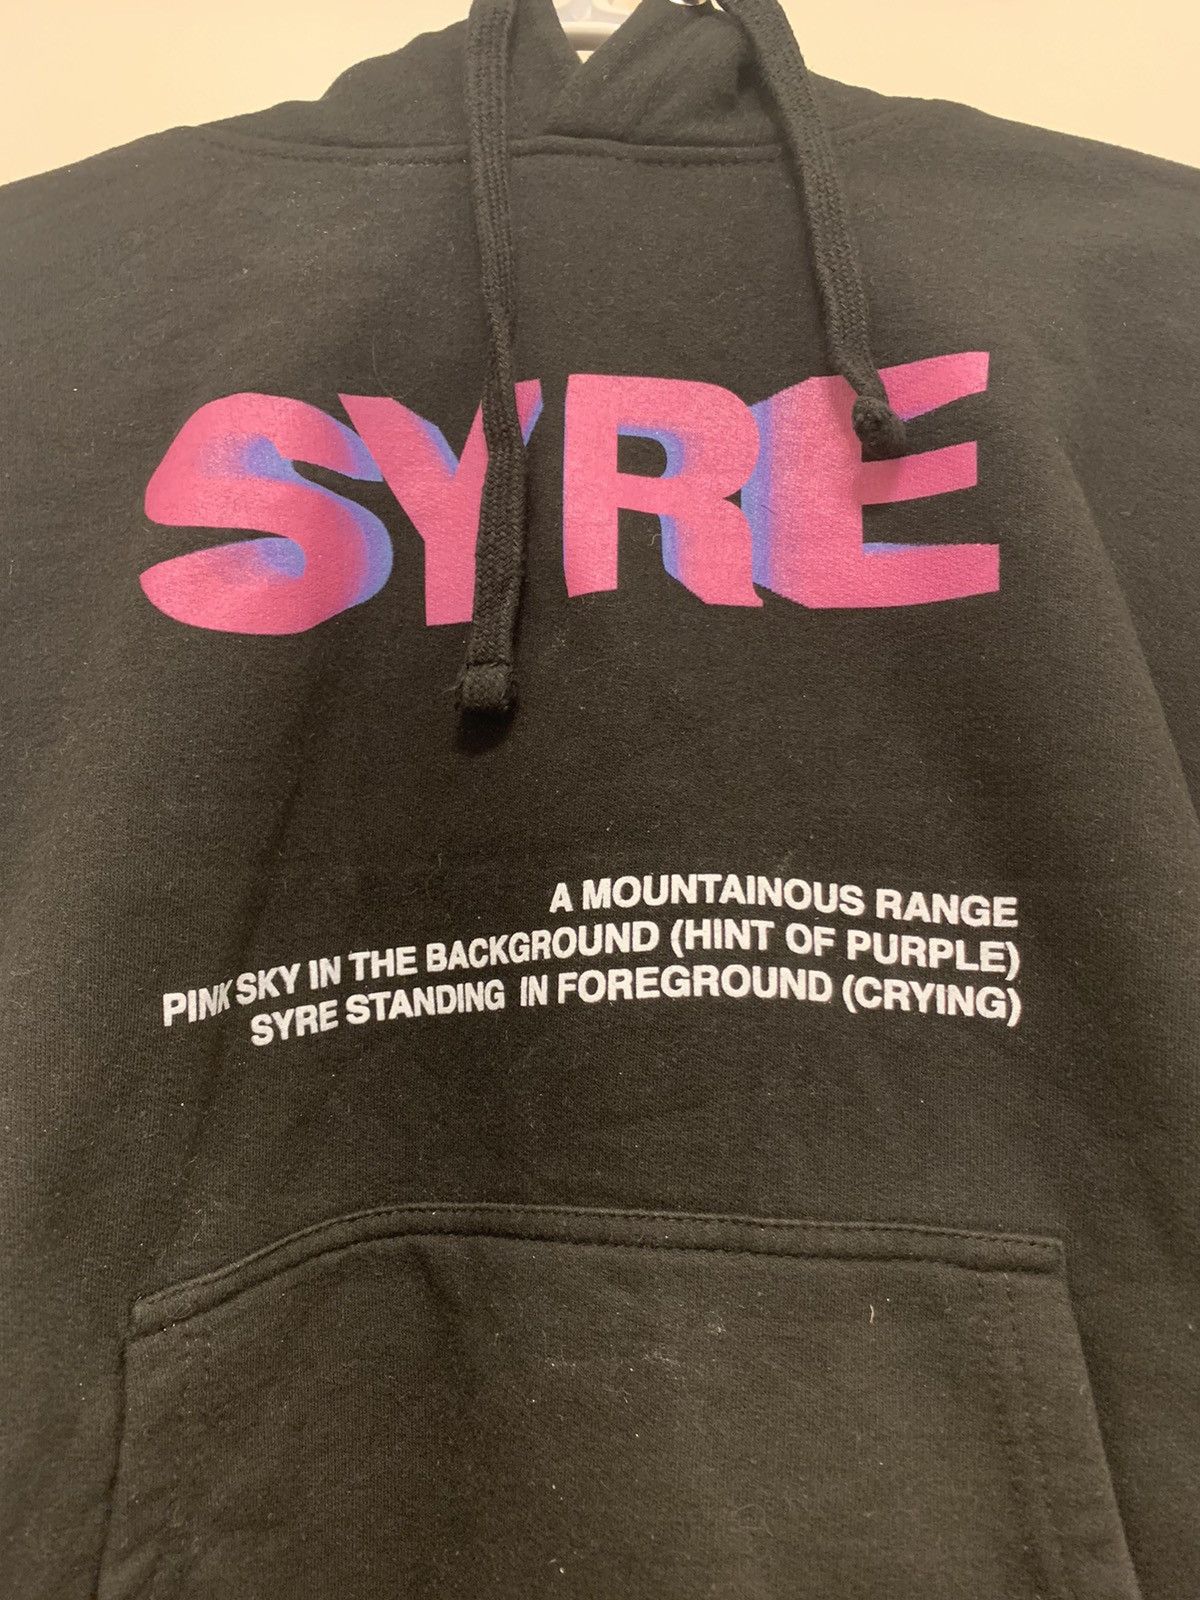 Msftsrep Jaden Smith MSFTsrep Syre Tour Hoodie Size US S / EU 44-46 / 1 - 2 Preview